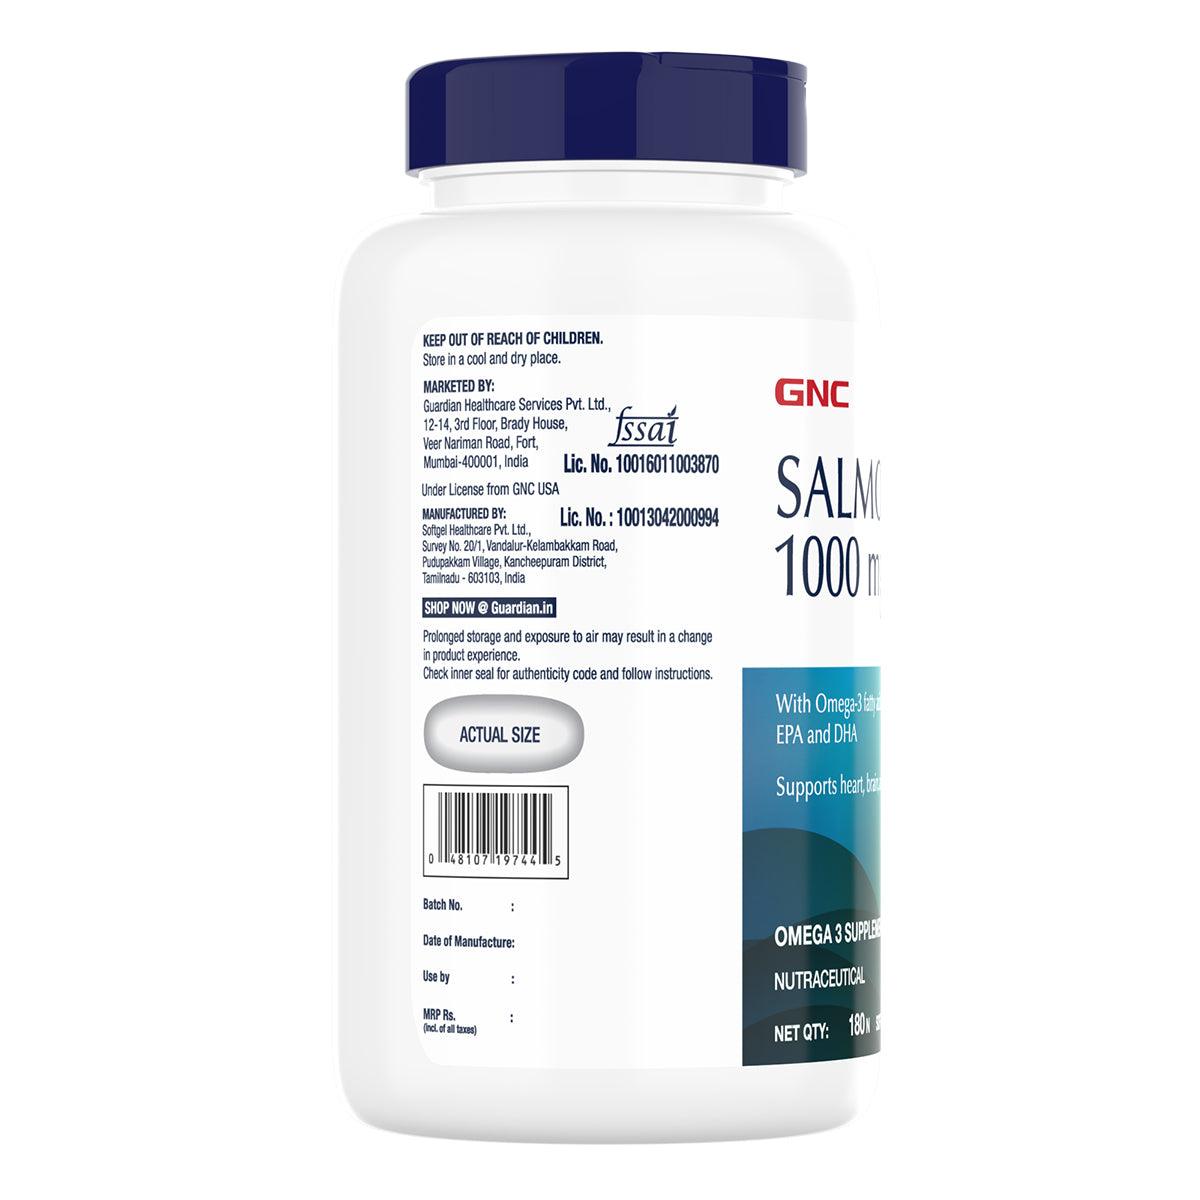 GNC Salmon Oil 1000mg - Supports Joint Health, Vision & Overall Well-Being